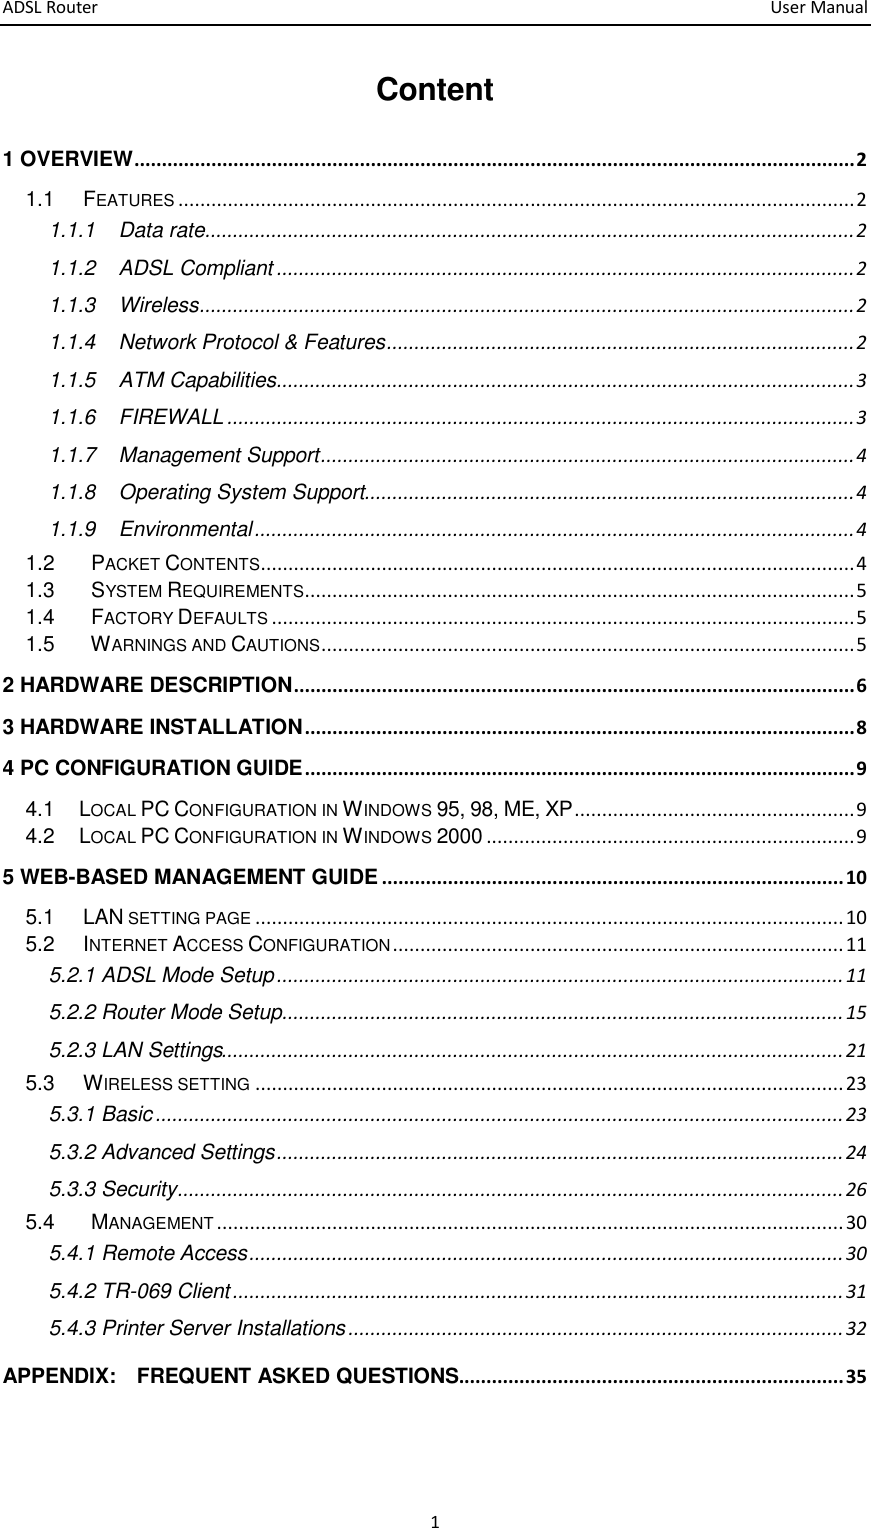 ADSL Router       User Manual 1 Content 1 OVERVIEW ................................................................................................................................... 2 1.1 FEATURES ........................................................................................................................... 2 1.1.1 Data rate ...................................................................................................................... 2 1.1.2 ADSL Compliant ......................................................................................................... 2 1.1.3 Wireless ....................................................................................................................... 2 1.1.4   Network Protocol &amp; Features ..................................................................................... 2 1.1.5 ATM Capabilities ......................................................................................................... 3 1.1.6 FIREWALL .................................................................................................................. 3 1.1.7 Management Support ................................................................................................. 4 1.1.8 Operating System Support ......................................................................................... 4 1.1.9 Environmental ............................................................................................................. 4 1.2  PACKET CONTENTS ............................................................................................................ 4 1.3  SYSTEM REQUIREMENTS.................................................................................................... 5 1.4  FACTORY DEFAULTS .......................................................................................................... 5 1.5  WARNINGS AND CAUTIONS ................................................................................................. 5 2 HARDWARE DESCRIPTION ...................................................................................................... 6 3 HARDWARE INSTALLATION .................................................................................................... 8 4 PC CONFIGURATION GUIDE .................................................................................................... 9 4.1      LOCAL PC CONFIGURATION IN WINDOWS 95, 98, ME, XP ................................................... 9 4.2      LOCAL PC CONFIGURATION IN WINDOWS 2000 ................................................................... 9 5 WEB-BASED MANAGEMENT GUIDE .................................................................................... 10 5.1 LAN SETTING PAGE ........................................................................................................... 10 5.2 INTERNET ACCESS CONFIGURATION .................................................................................. 11 5.2.1 ADSL Mode Setup ....................................................................................................... 11 5.2.2 Router Mode Setup ...................................................................................................... 15 5.2.3 LAN Settings................................................................................................................. 21 5.3 WIRELESS SETTING ........................................................................................................... 23 5.3.1 Basic ............................................................................................................................. 23 5.3.2 Advanced Settings ....................................................................................................... 24 5.3.3 Security ......................................................................................................................... 26 5.4  MANAGEMENT .................................................................................................................. 30 5.4.1 Remote Access ............................................................................................................ 30 5.4.2 TR-069 Client ............................................................................................................... 31 5.4.3 Printer Server Installations .......................................................................................... 32 APPENDIX:    FREQUENT ASKED QUESTIONS...................................................................... 35  